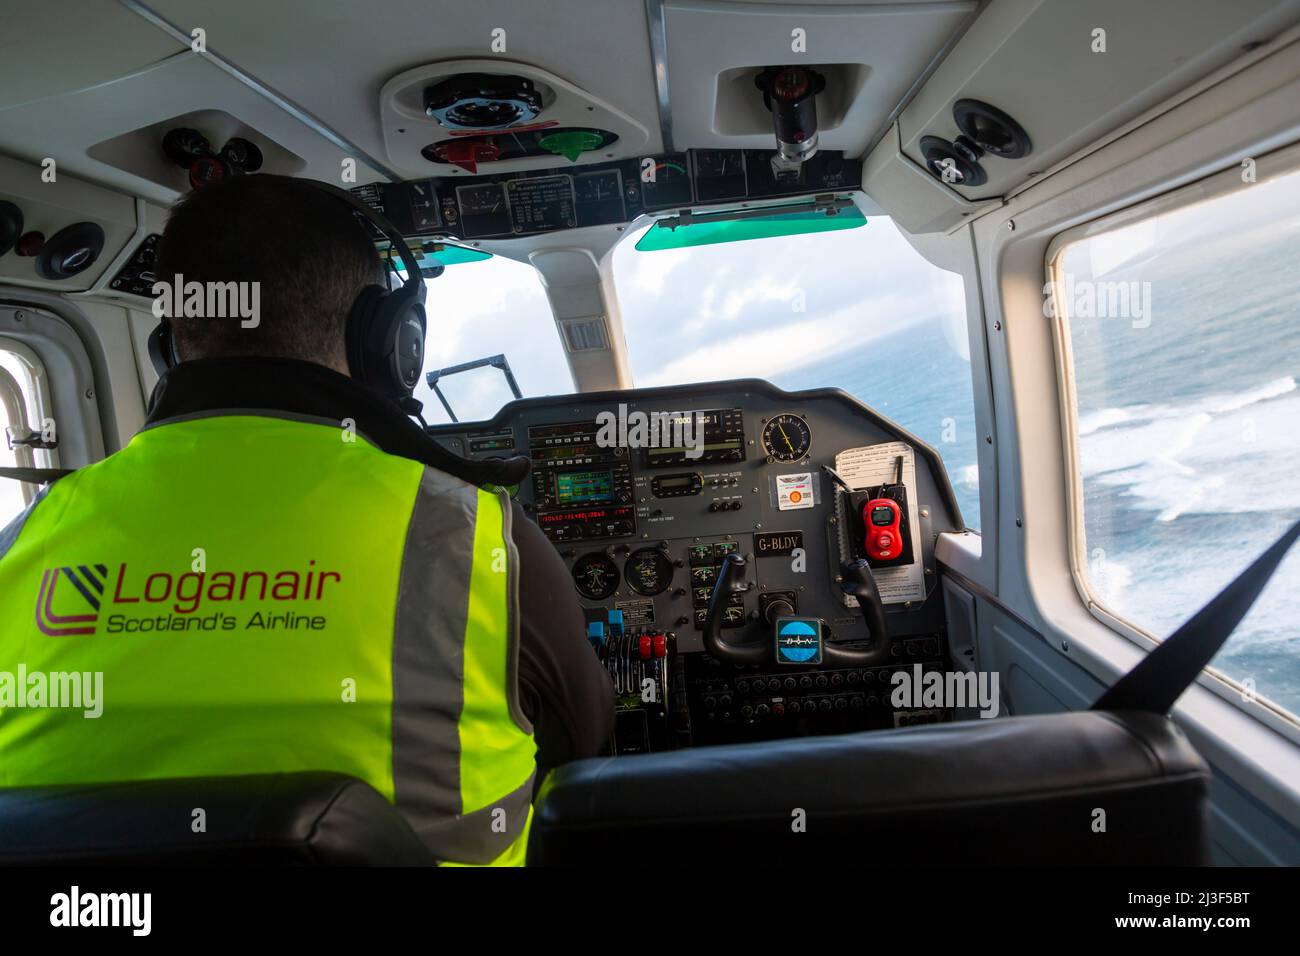 Pilot in midair, Loganair small aircraft on its way to Papa Westray, Orkney Islands, UK Stock Photo